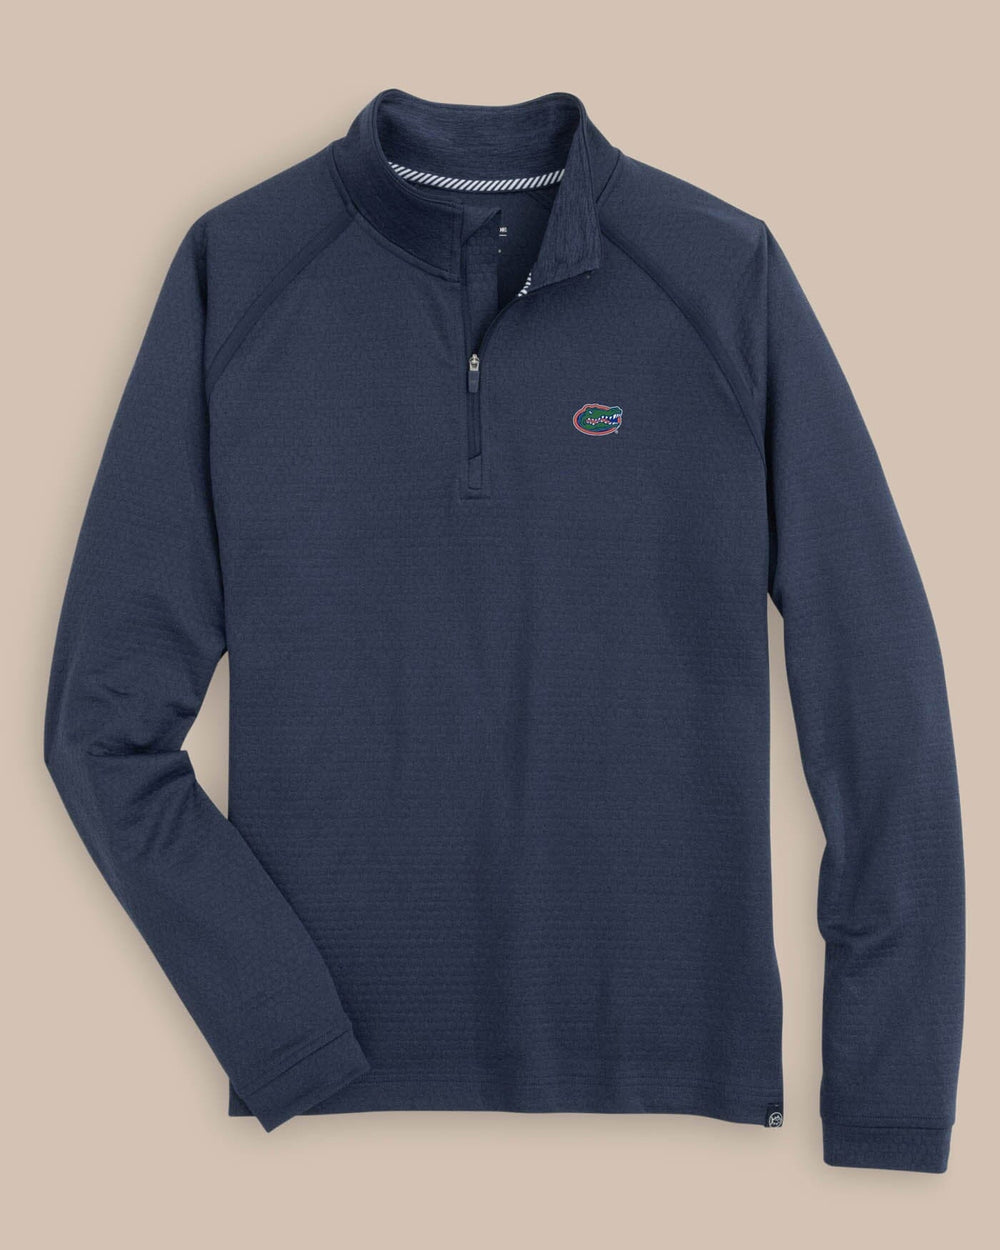 The front view of the Florida Gators Scuttle Heather Quarter Zip by Southern Tide - Navy